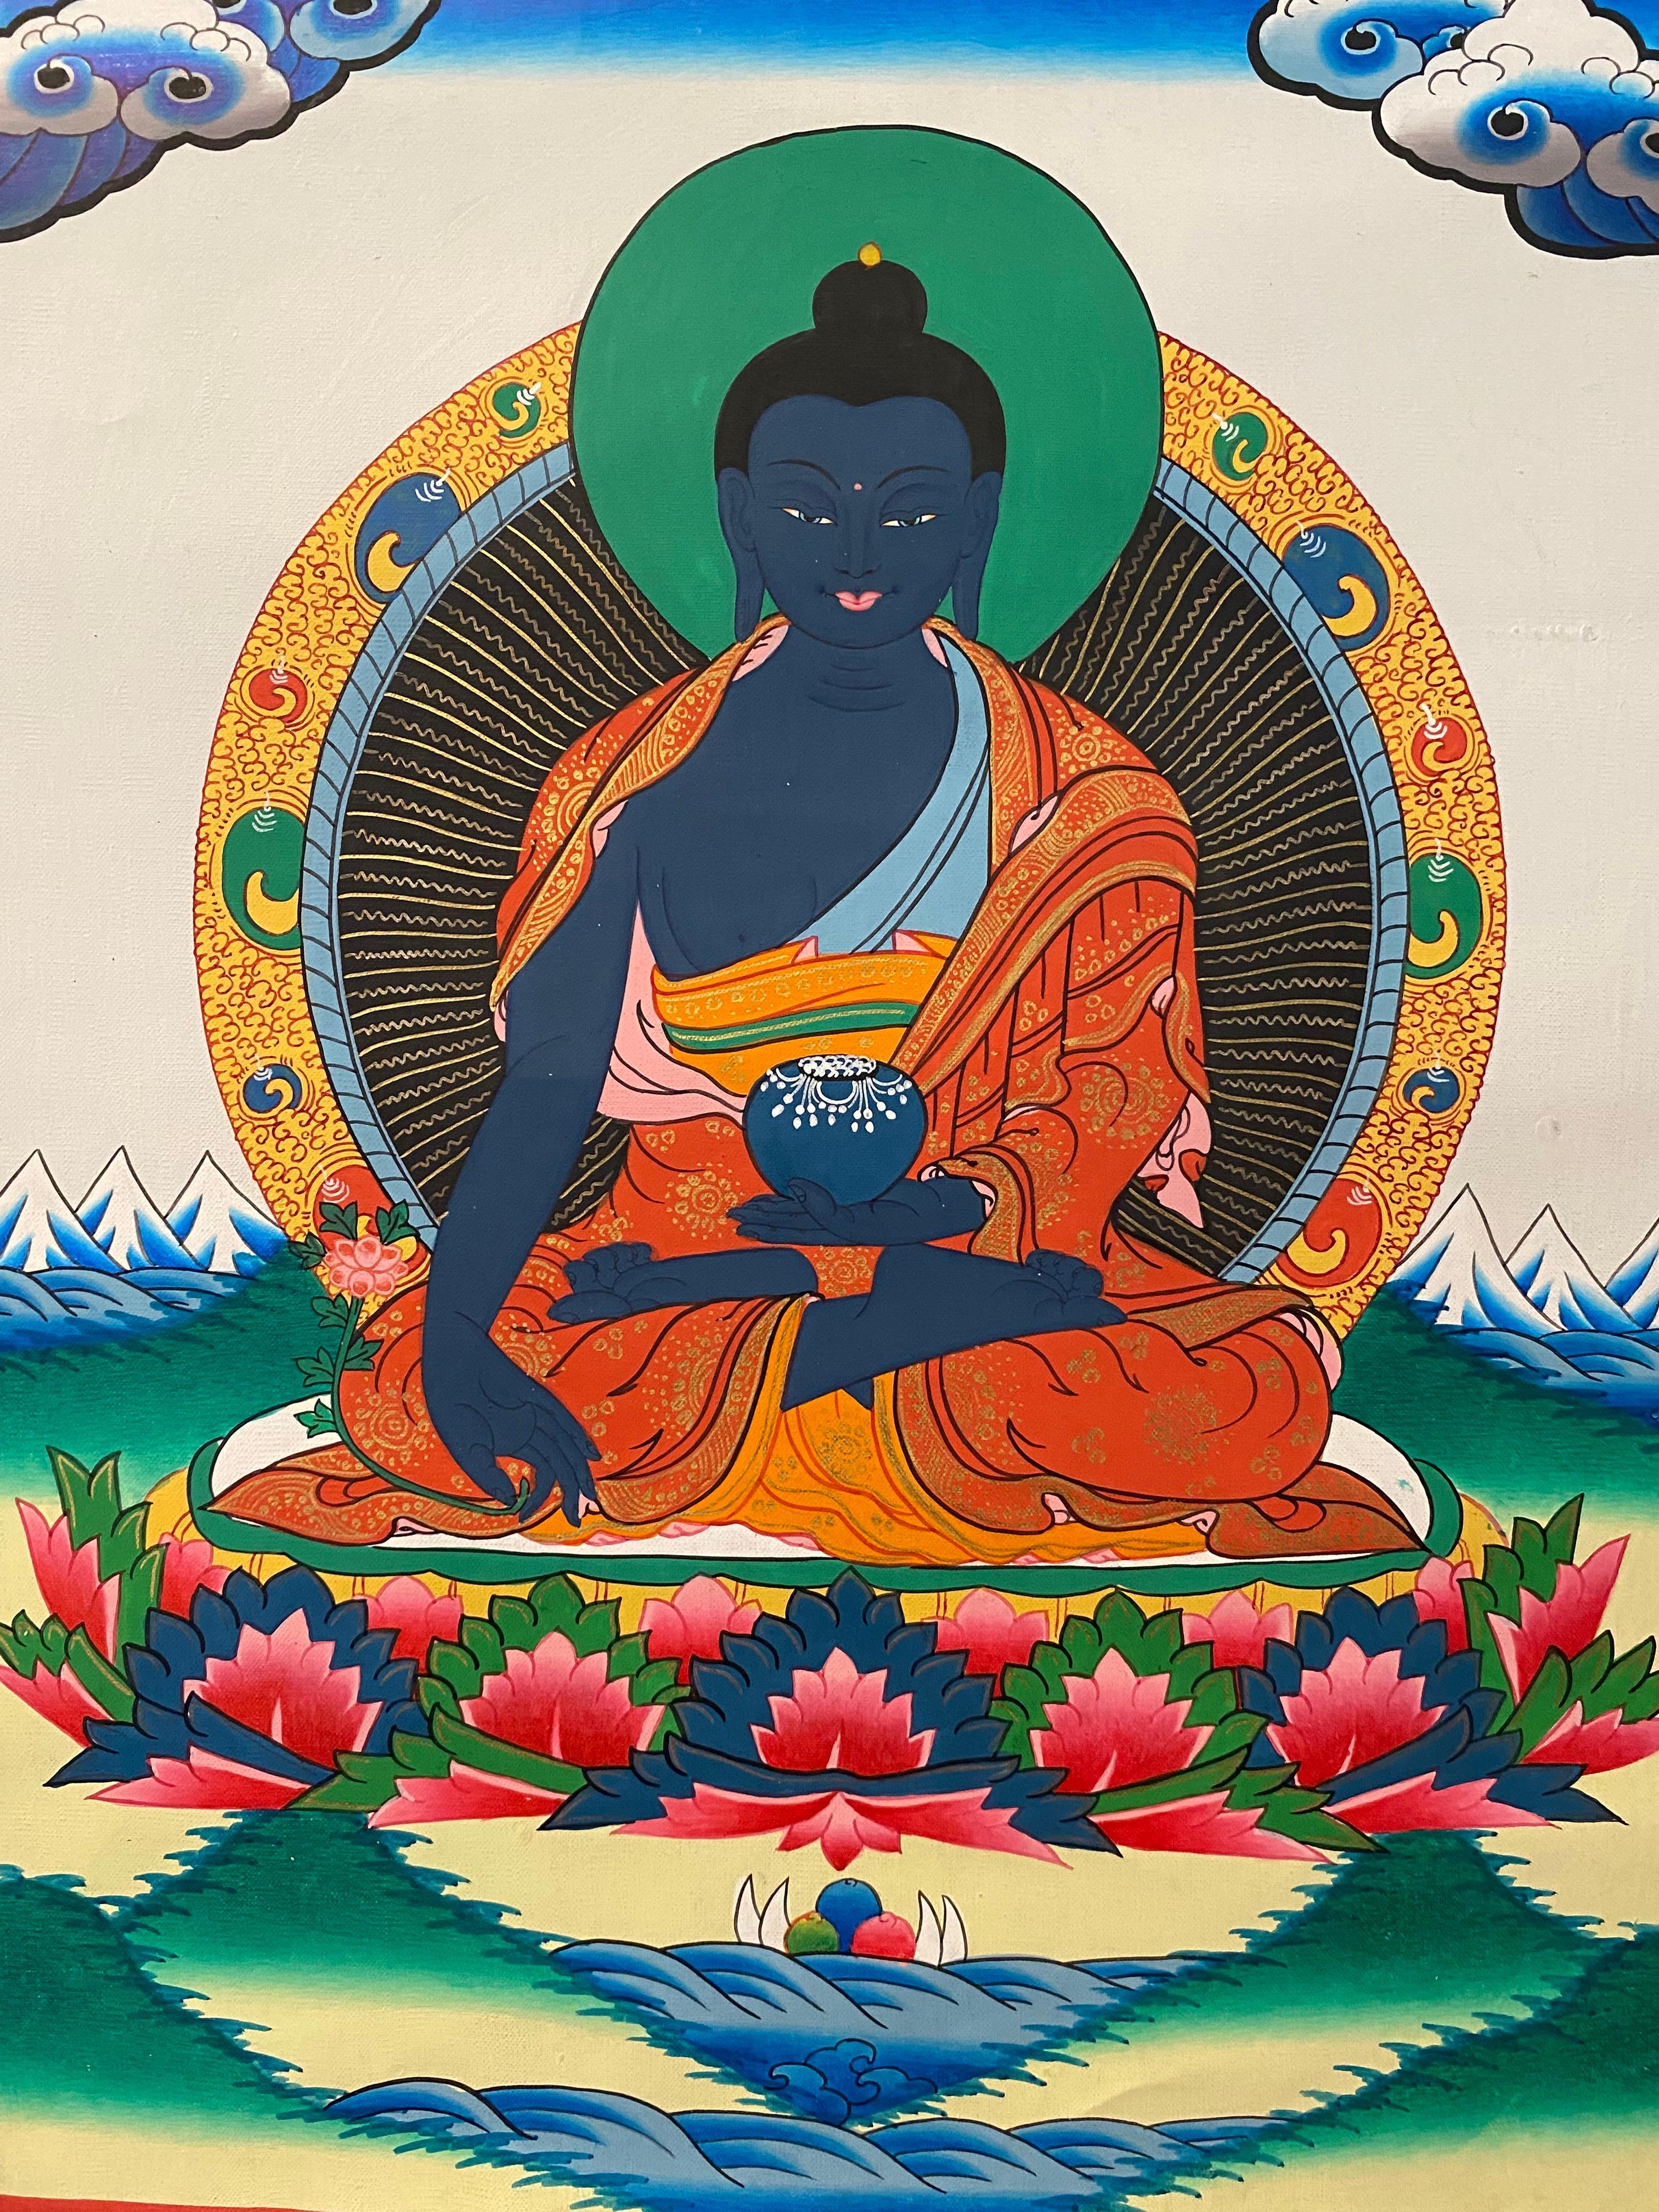 Unframed Medicine Buddha thangka is hand painted on Canvas. 
Medicine Buddha is known as 